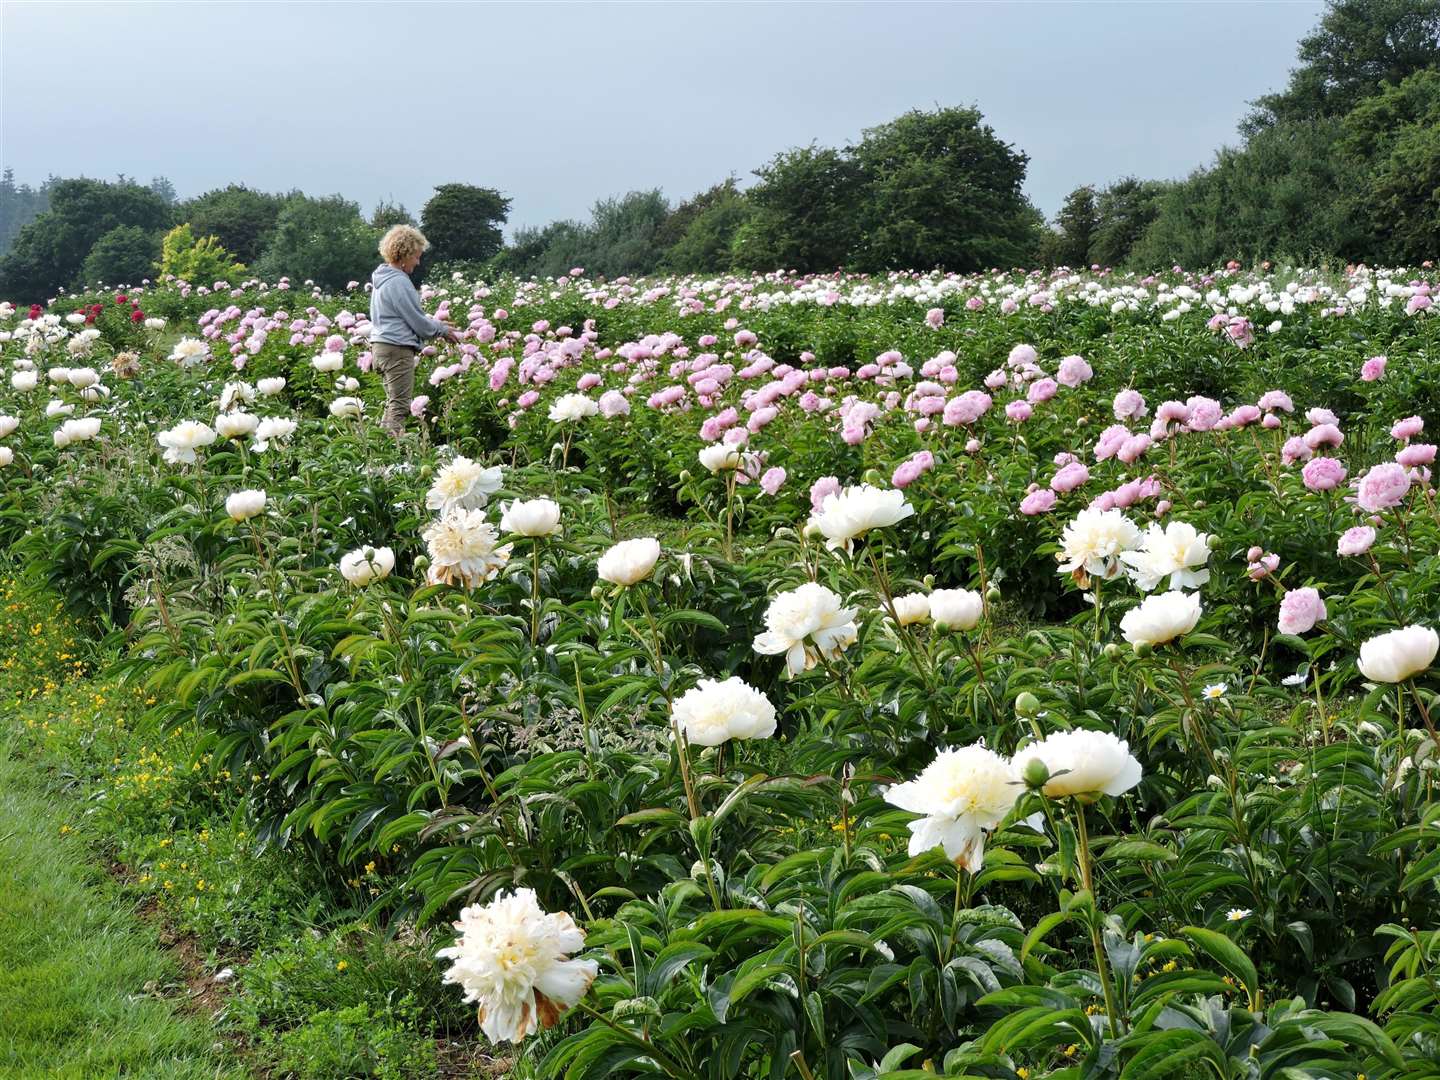 Kate Blacker's colleague Linda Moore inspects the peonies